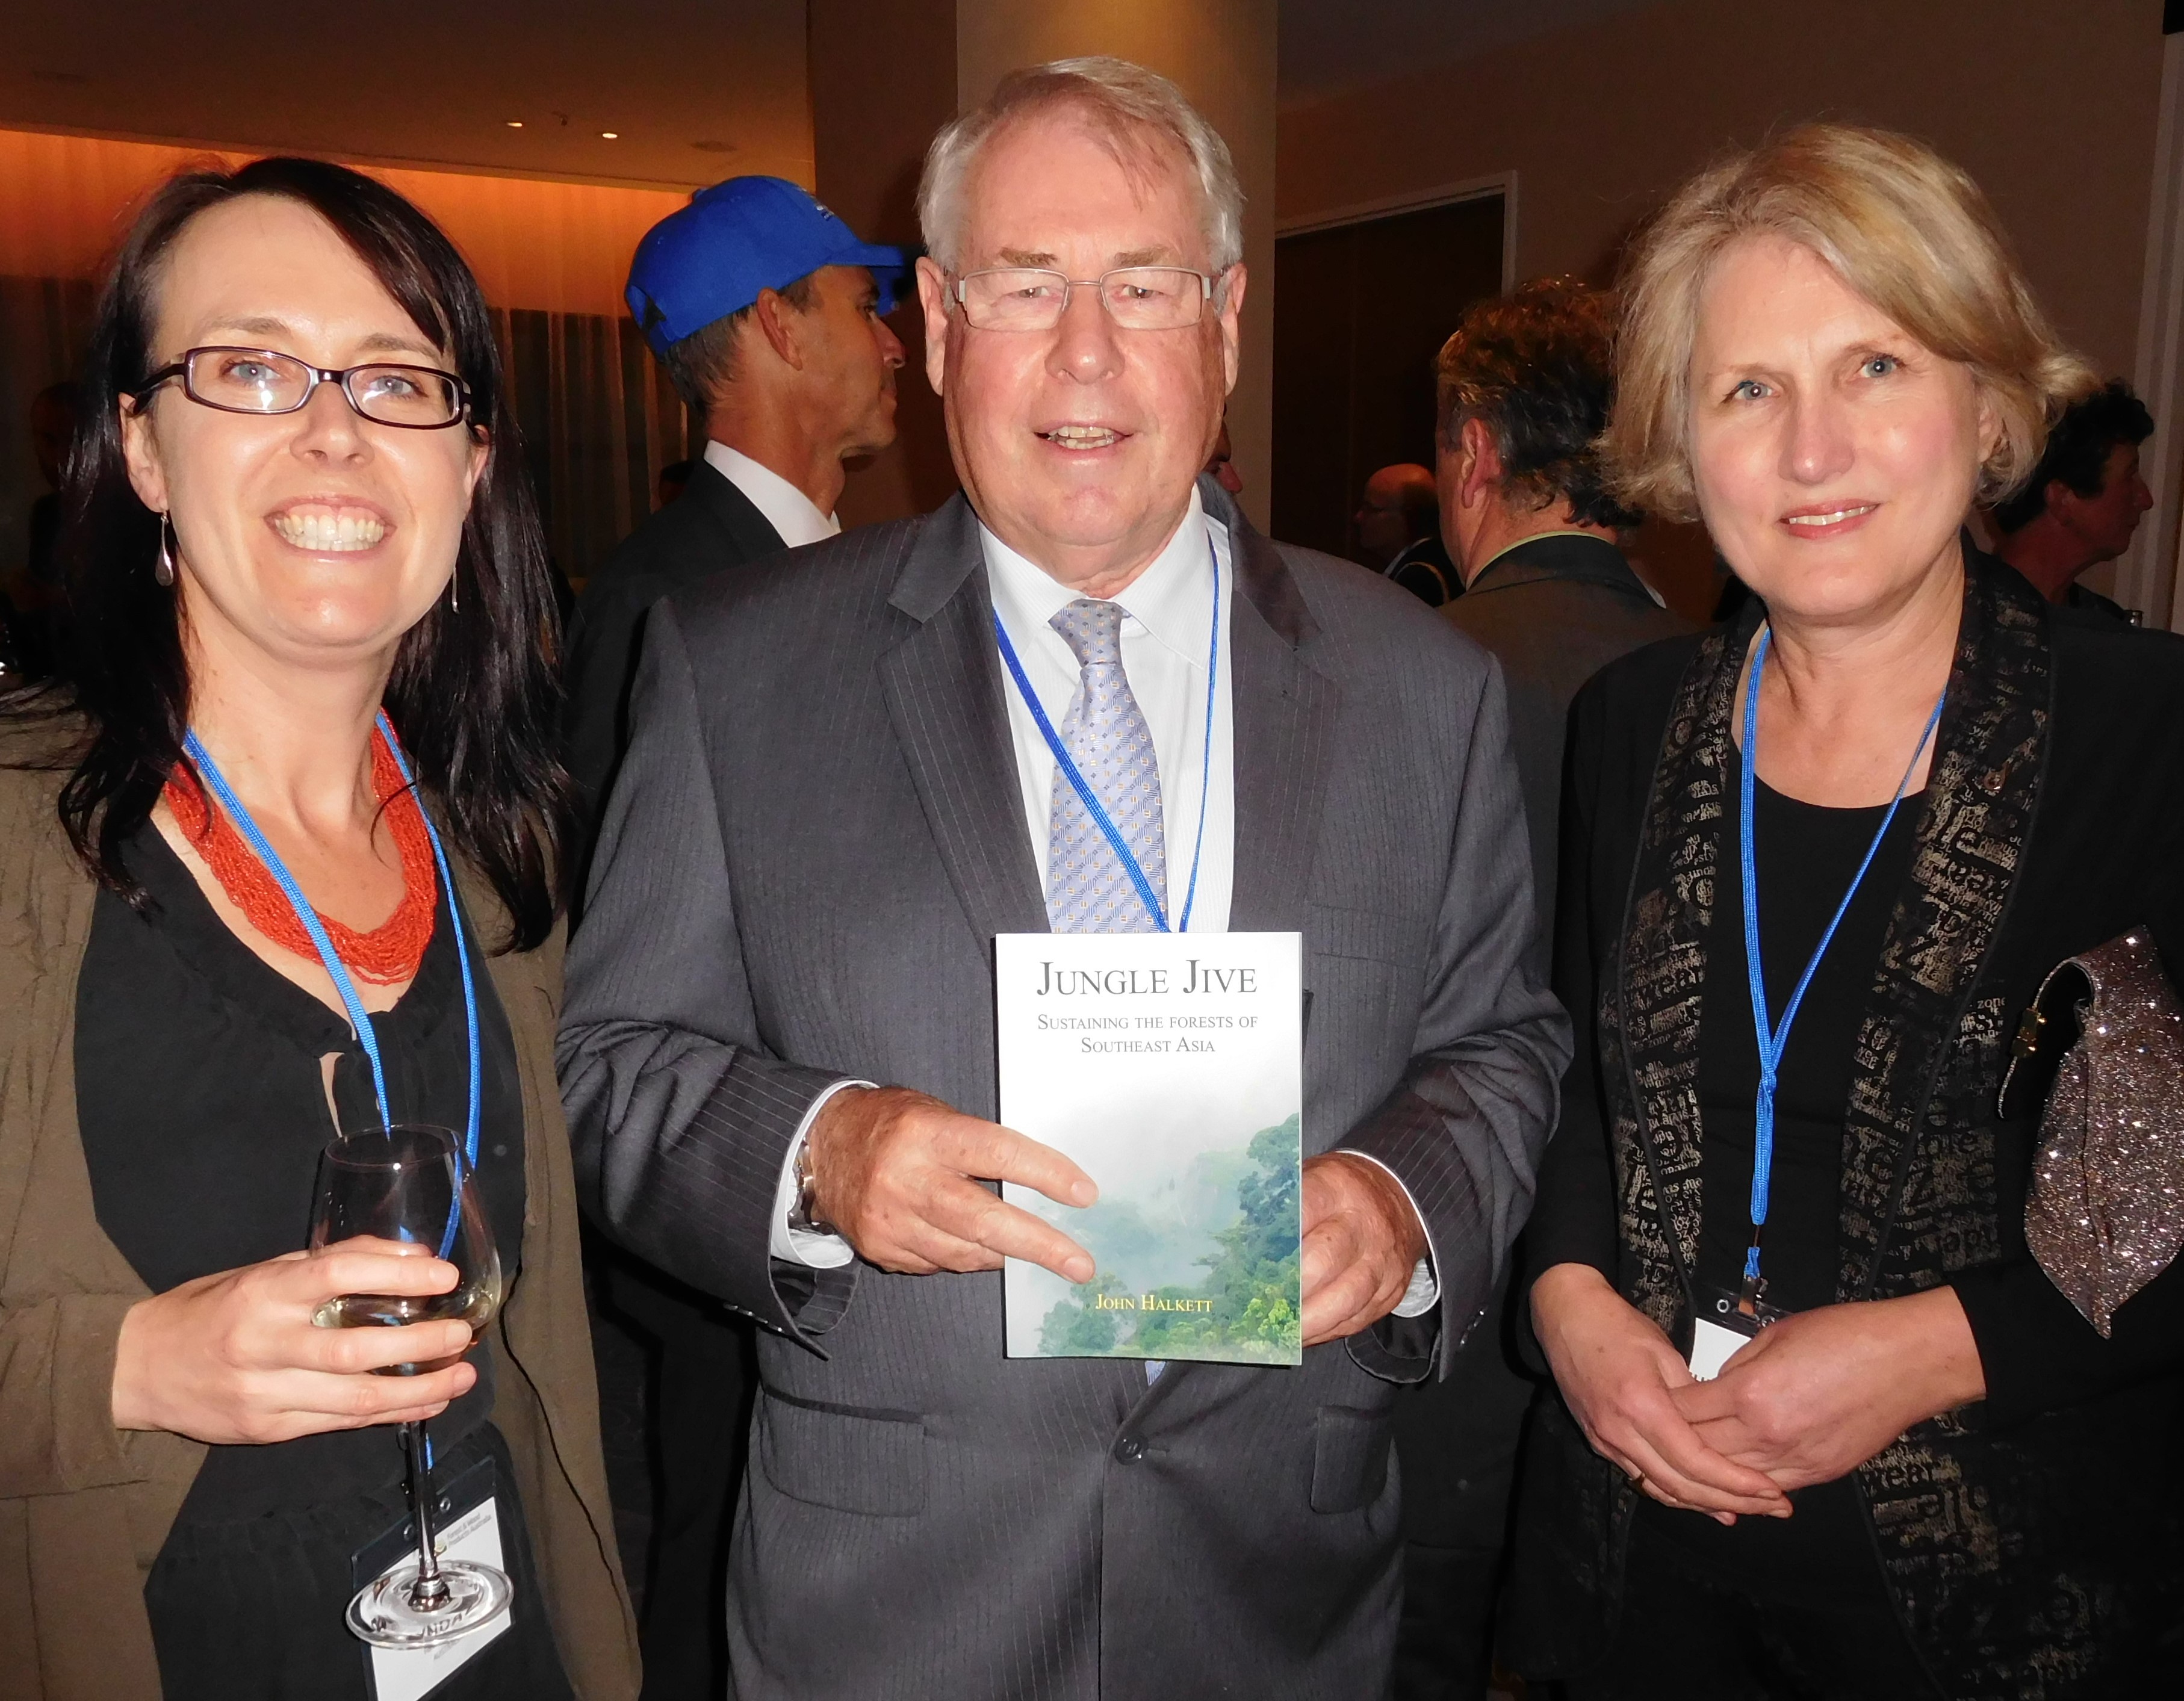 Dr Lyndall Bull, director, Forestry Tasmania, and Cr Christine Sindt, Latrobe City, Victoria, congratulate John Halkett at the book launch at the Melbourne Outlook and Insights Conference.